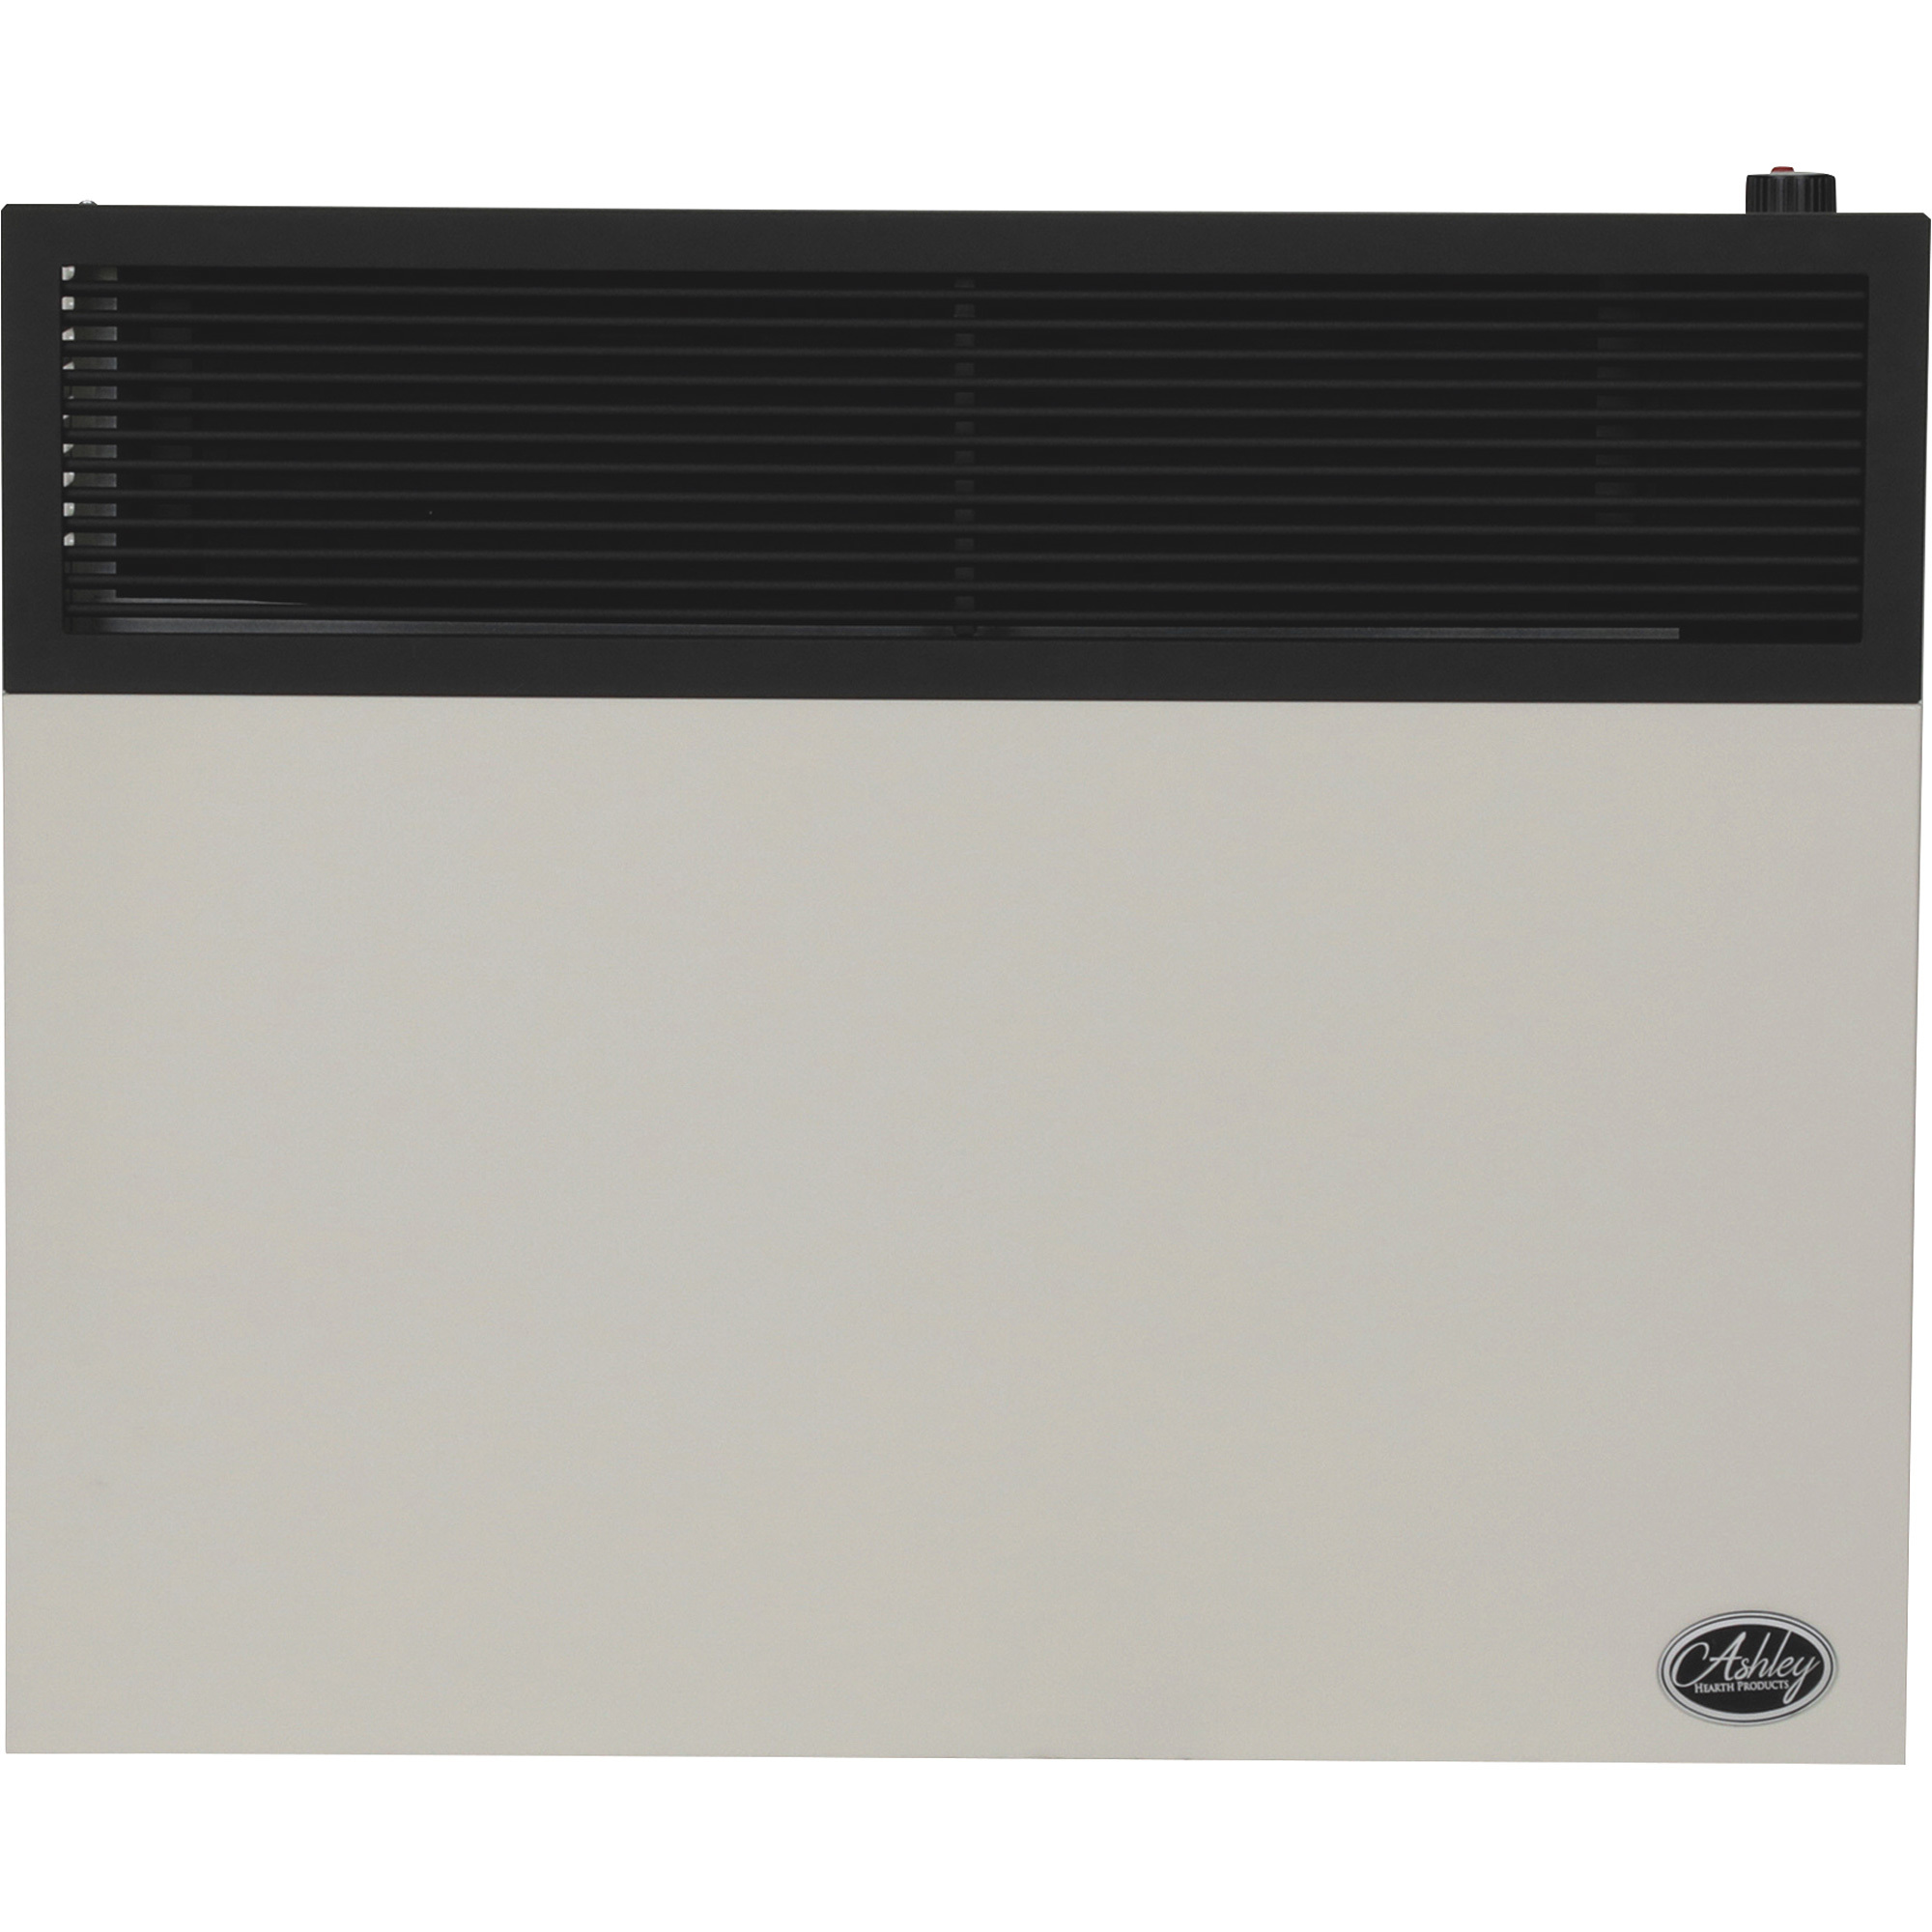 Ashley Hearth Direct Vent LP Wall Heater with Venting â 25,000 BTU, Model DVAG30L